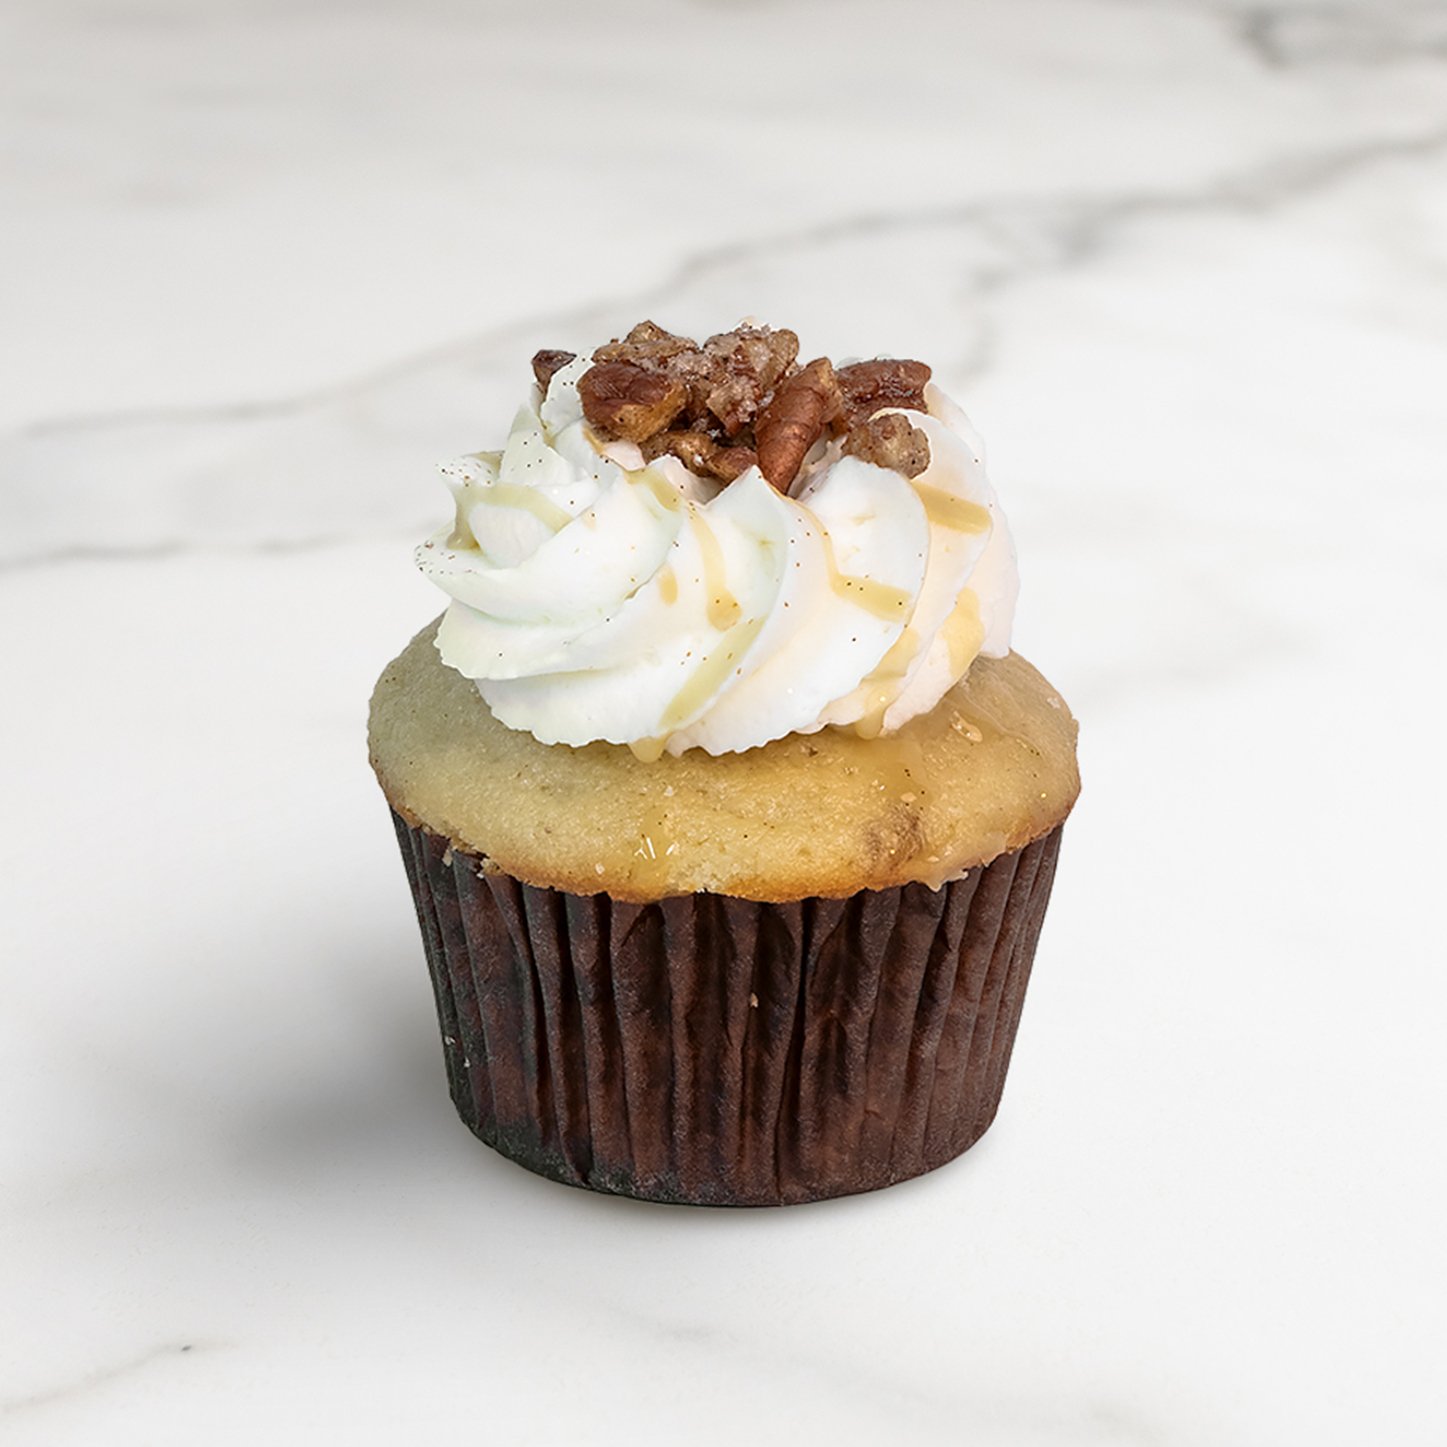 Candied Maple Pecan Oh My Cupcakes!